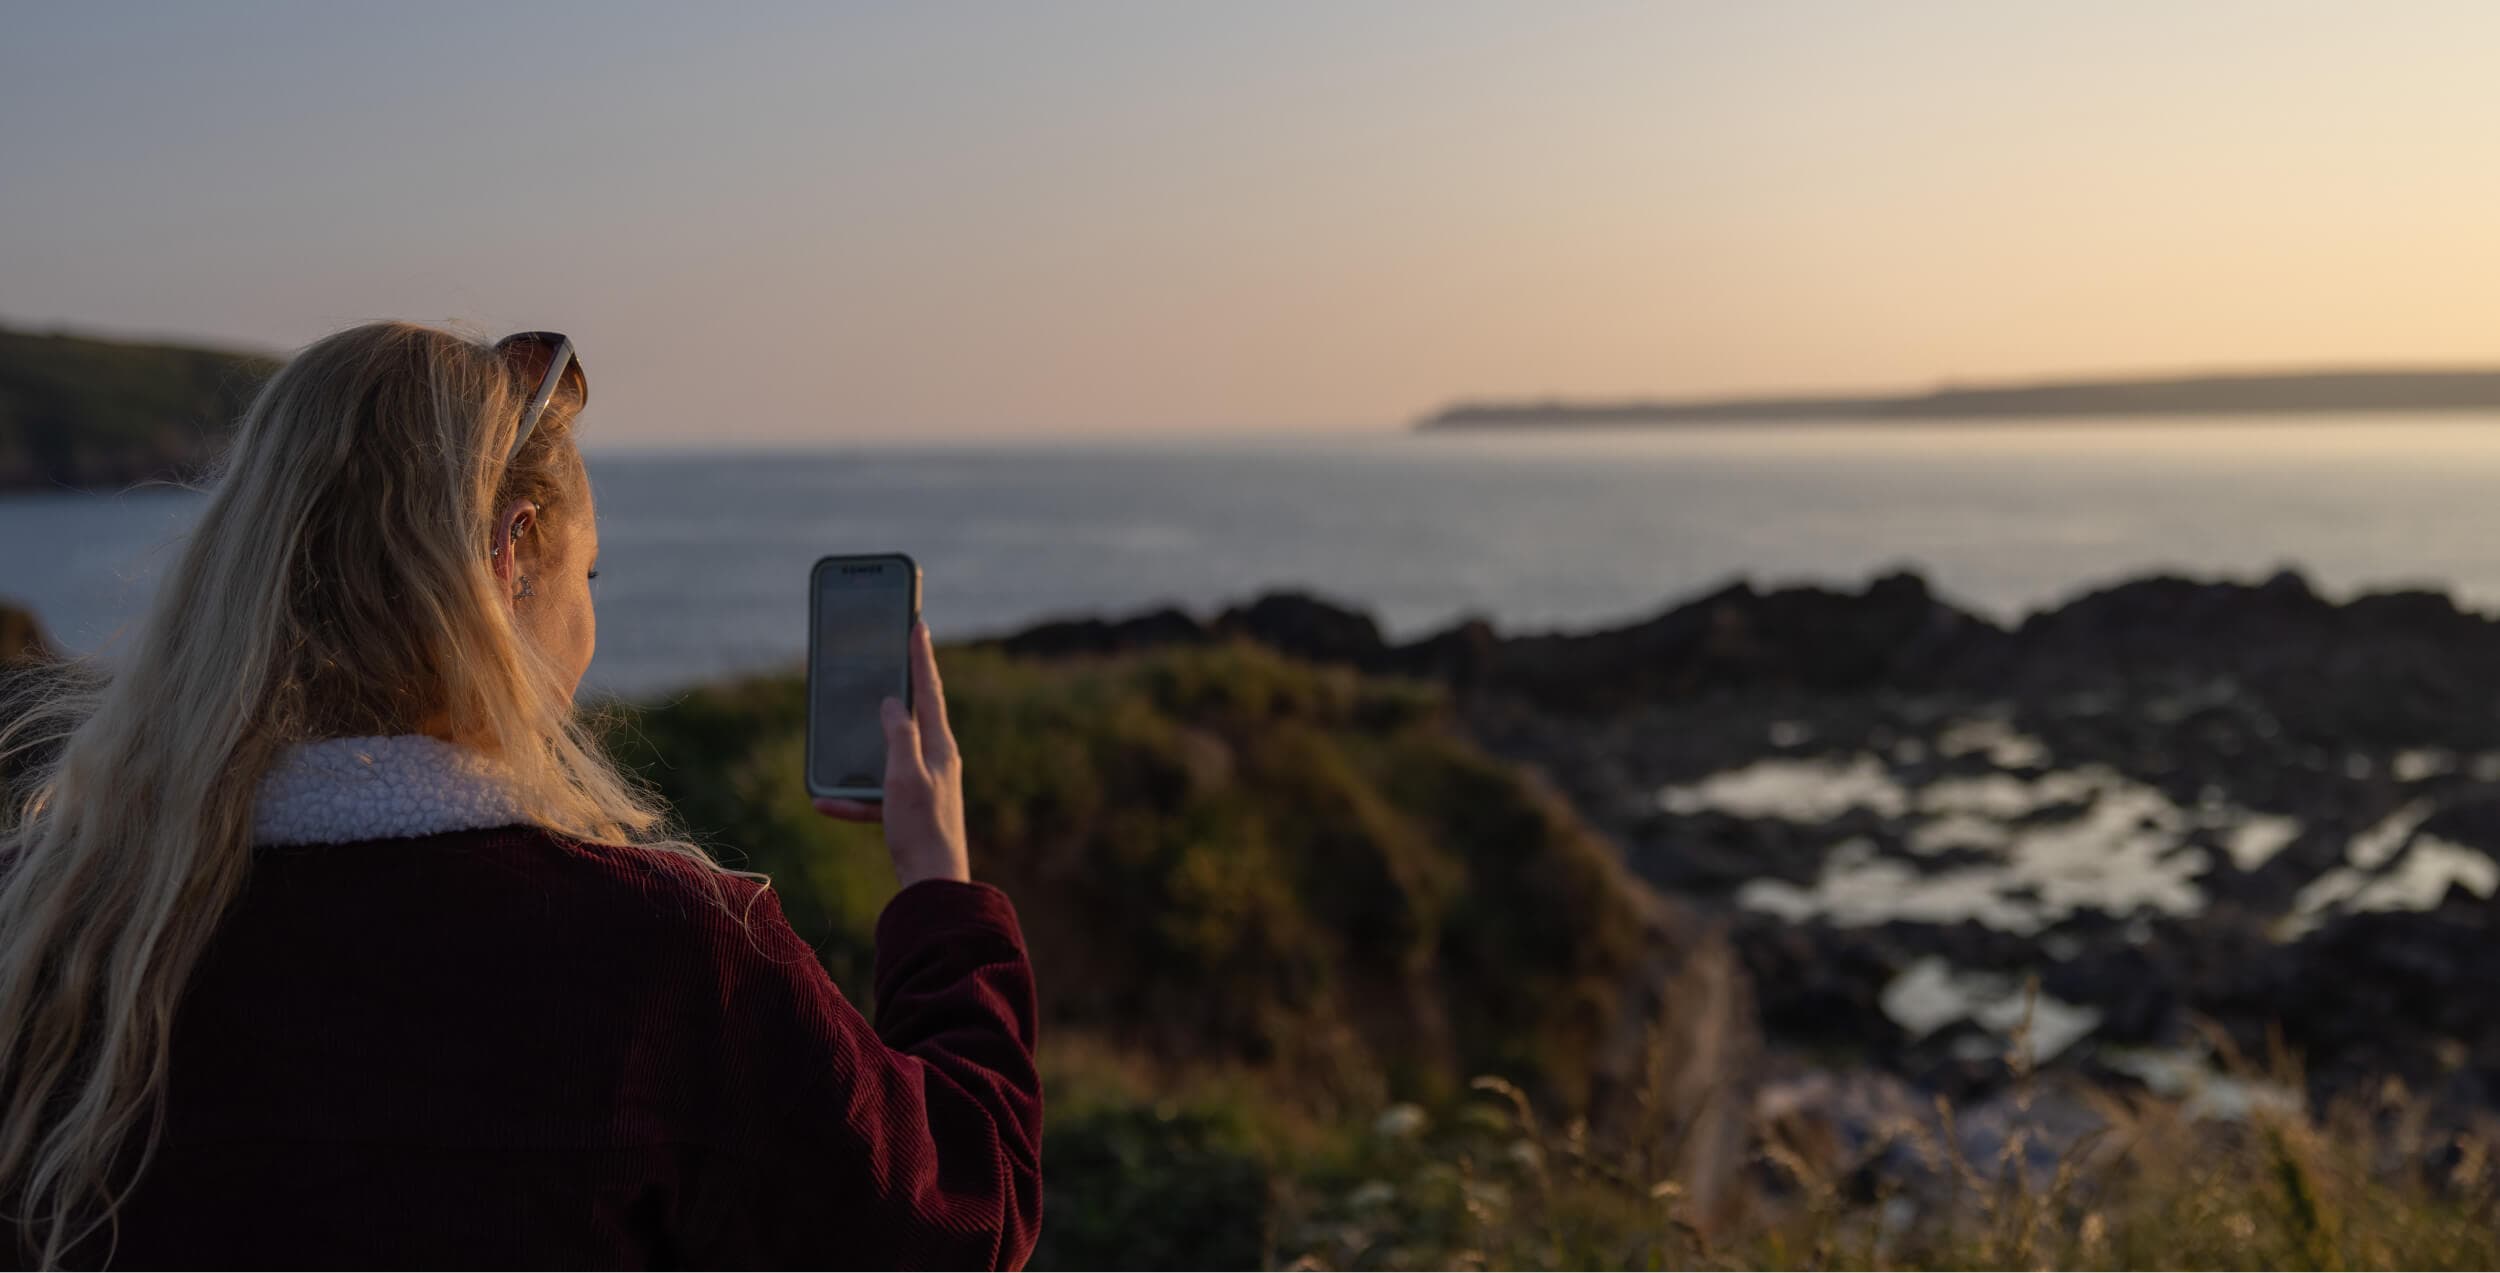 Girl taking a photo of the landscape with a smartphone